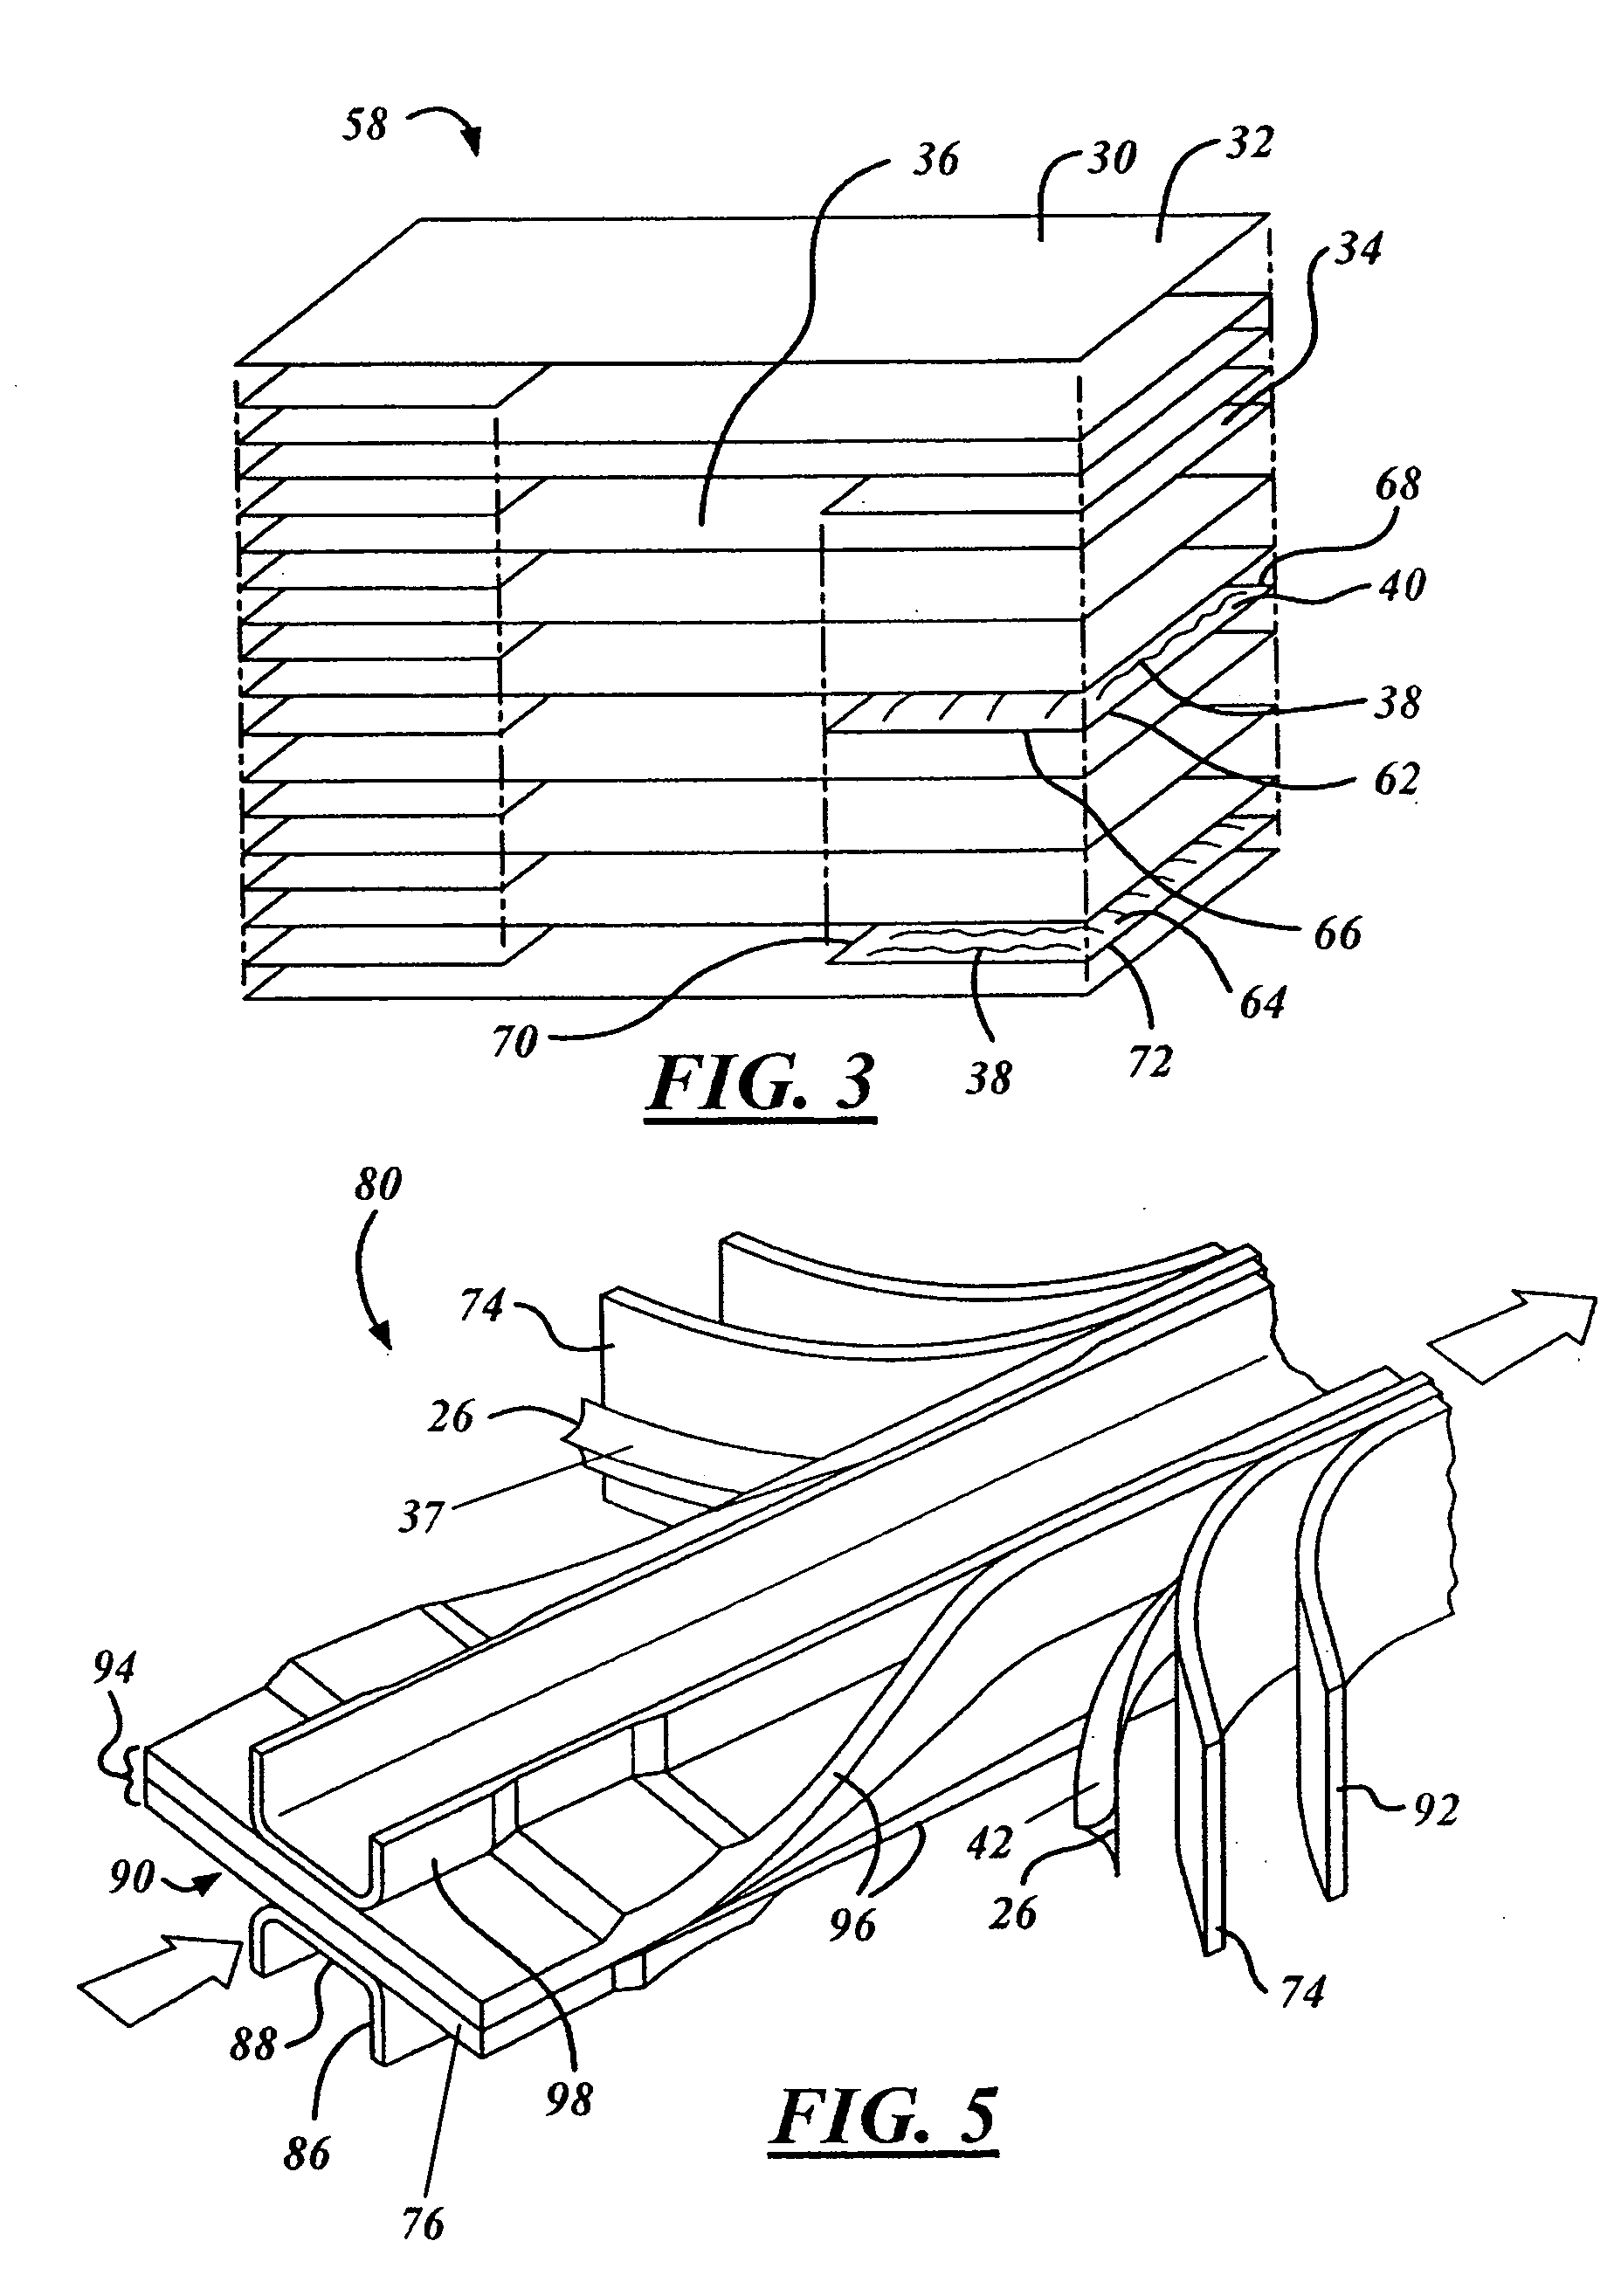 Novel fabrication process for thermoplastic composite parts